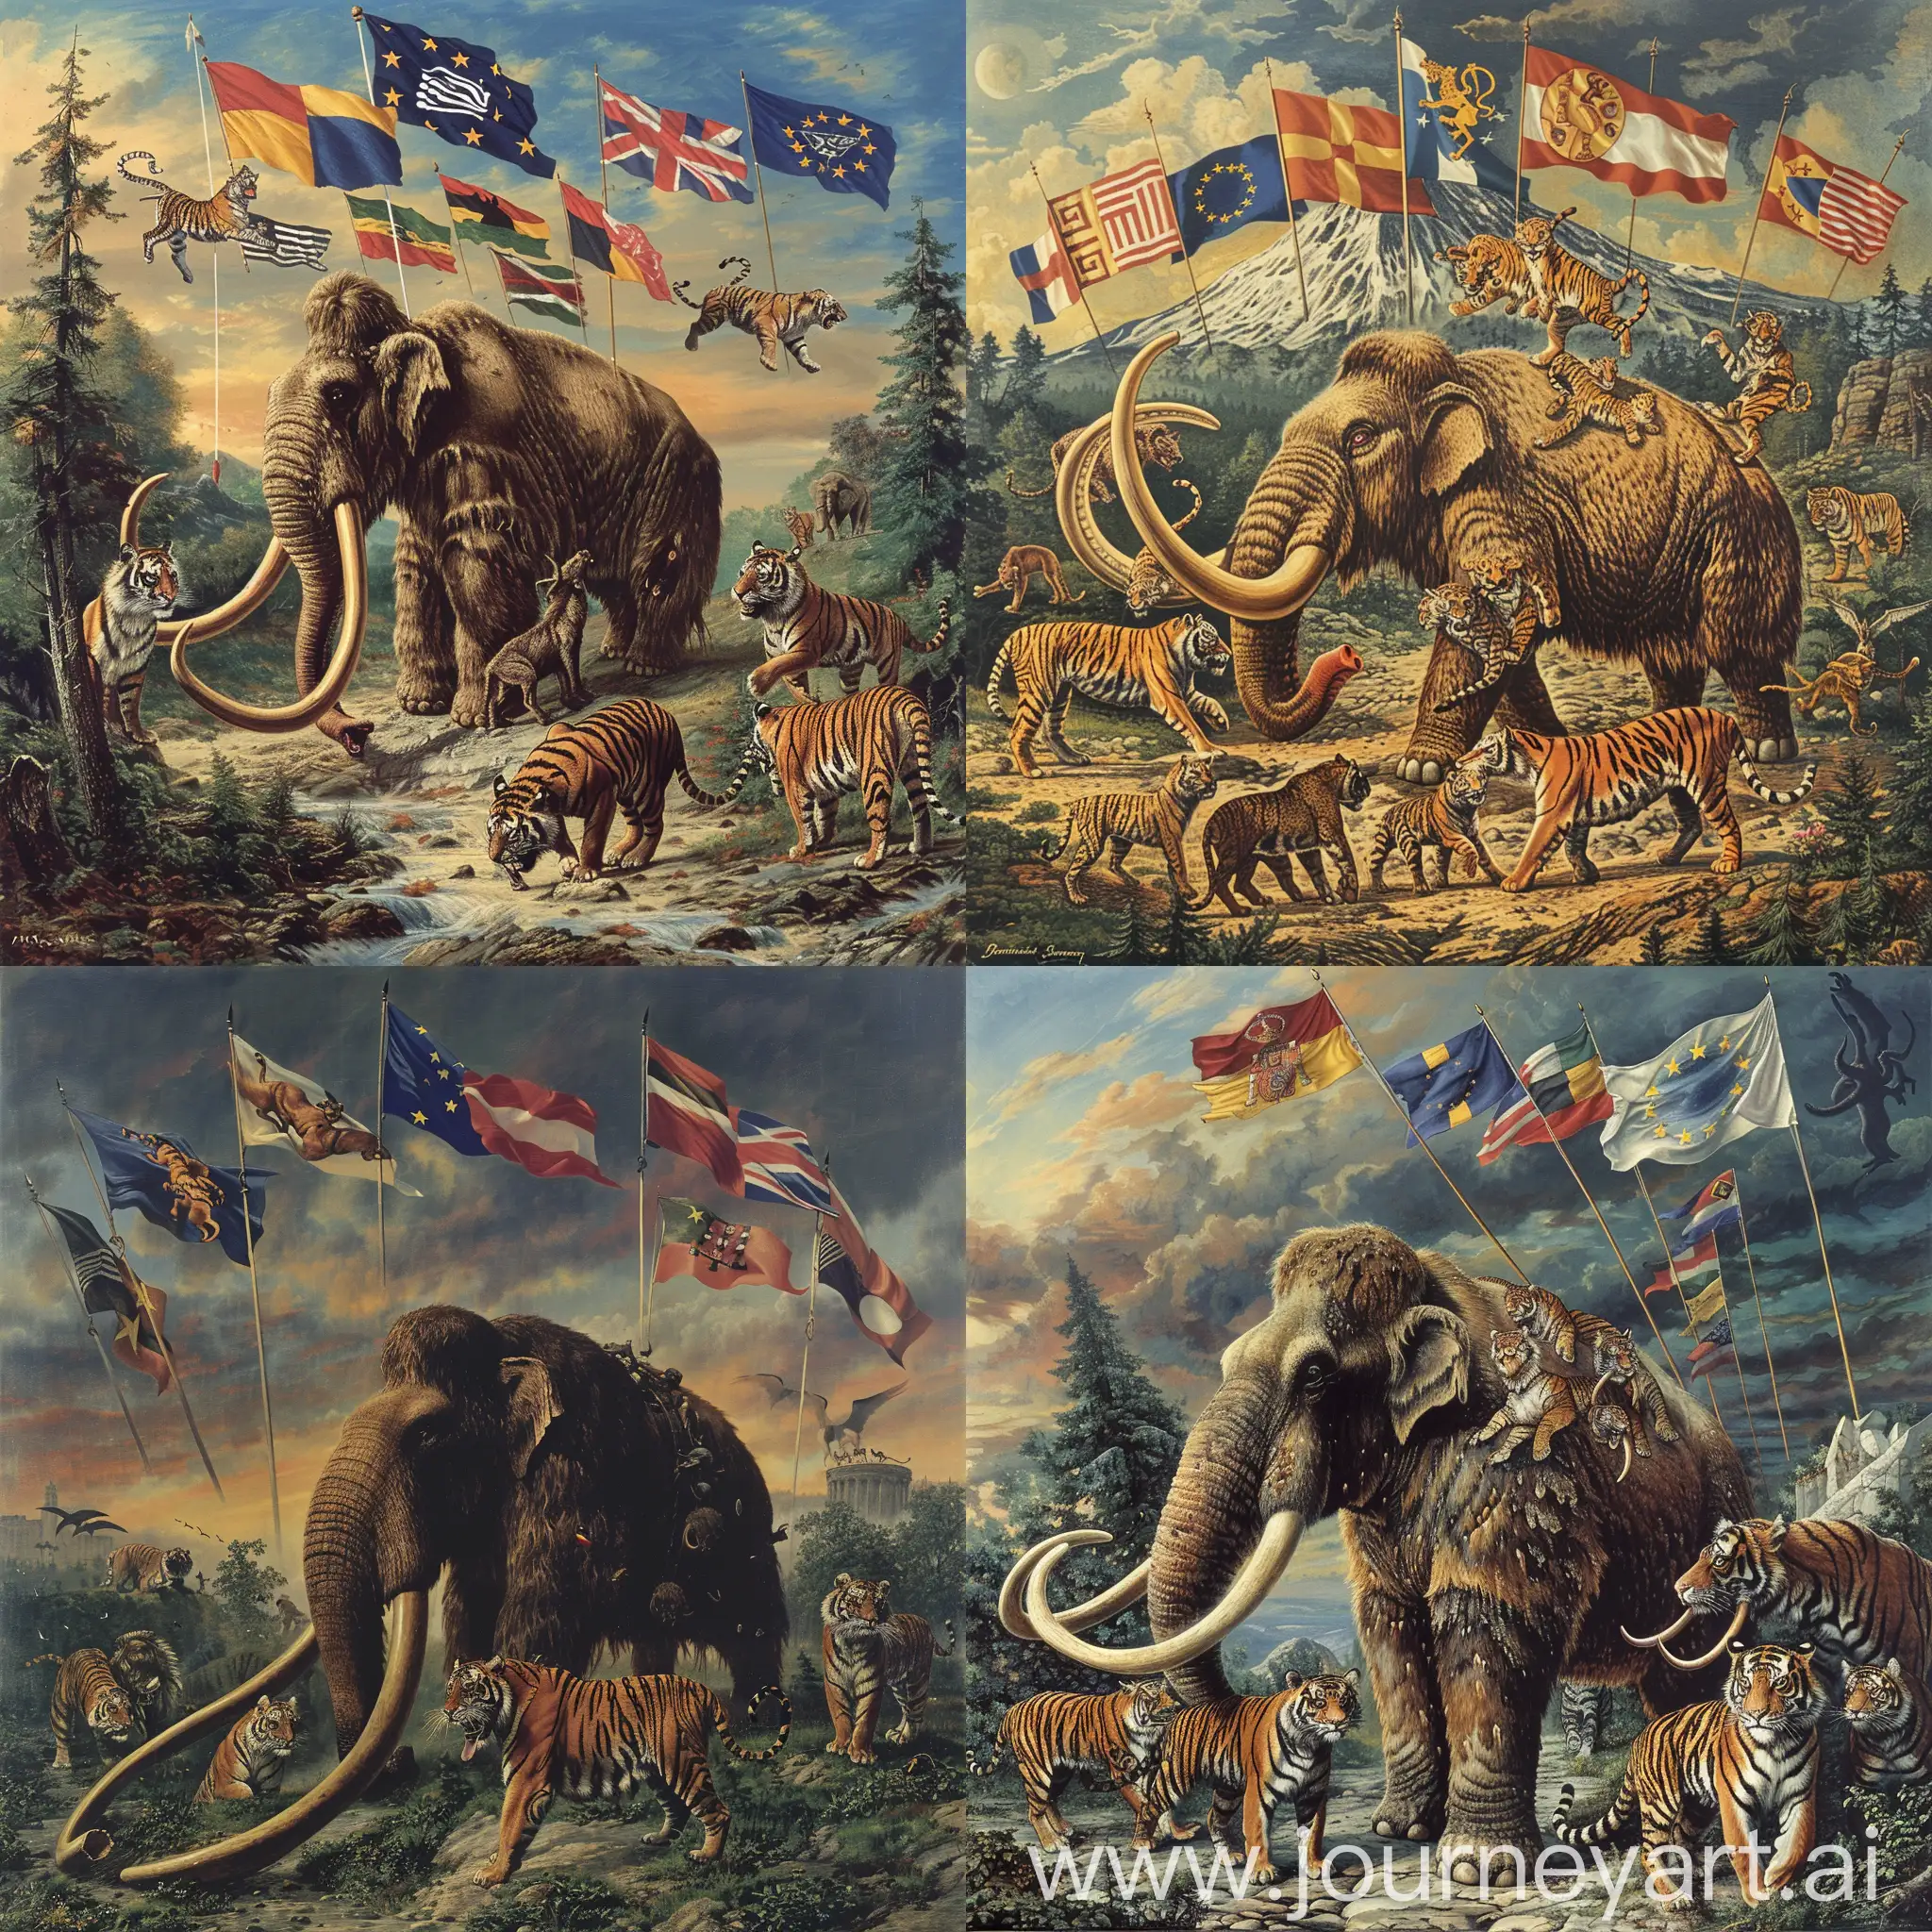 Majestic-Mammoth-Surrounded-by-Predators-Beneath-European-Flags